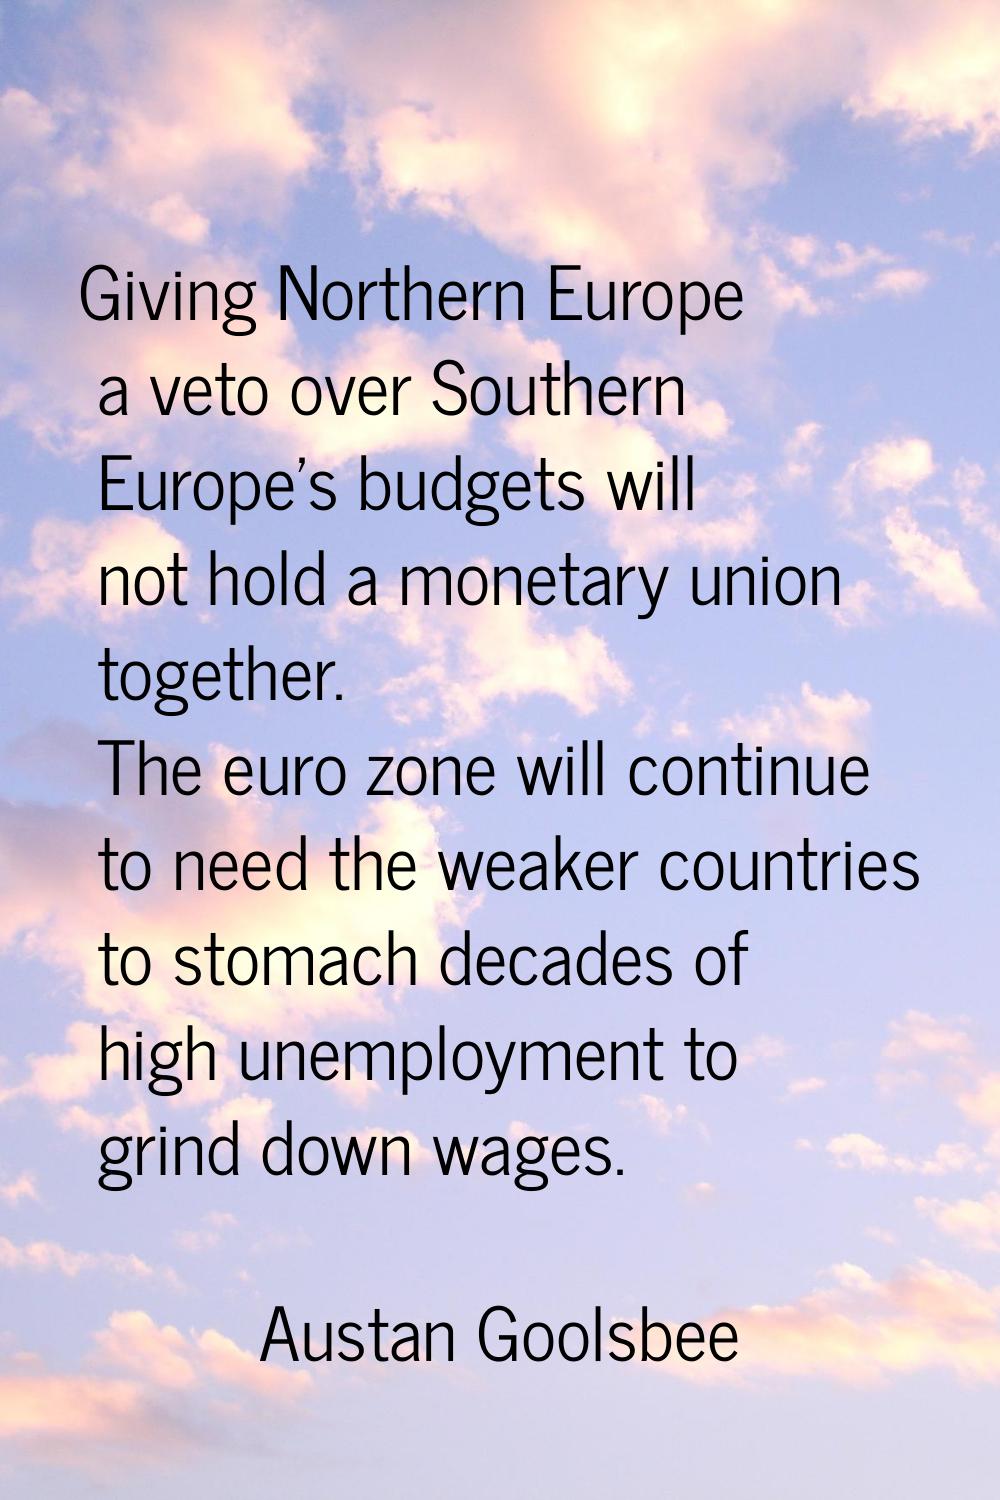 Giving Northern Europe a veto over Southern Europe's budgets will not hold a monetary union togethe